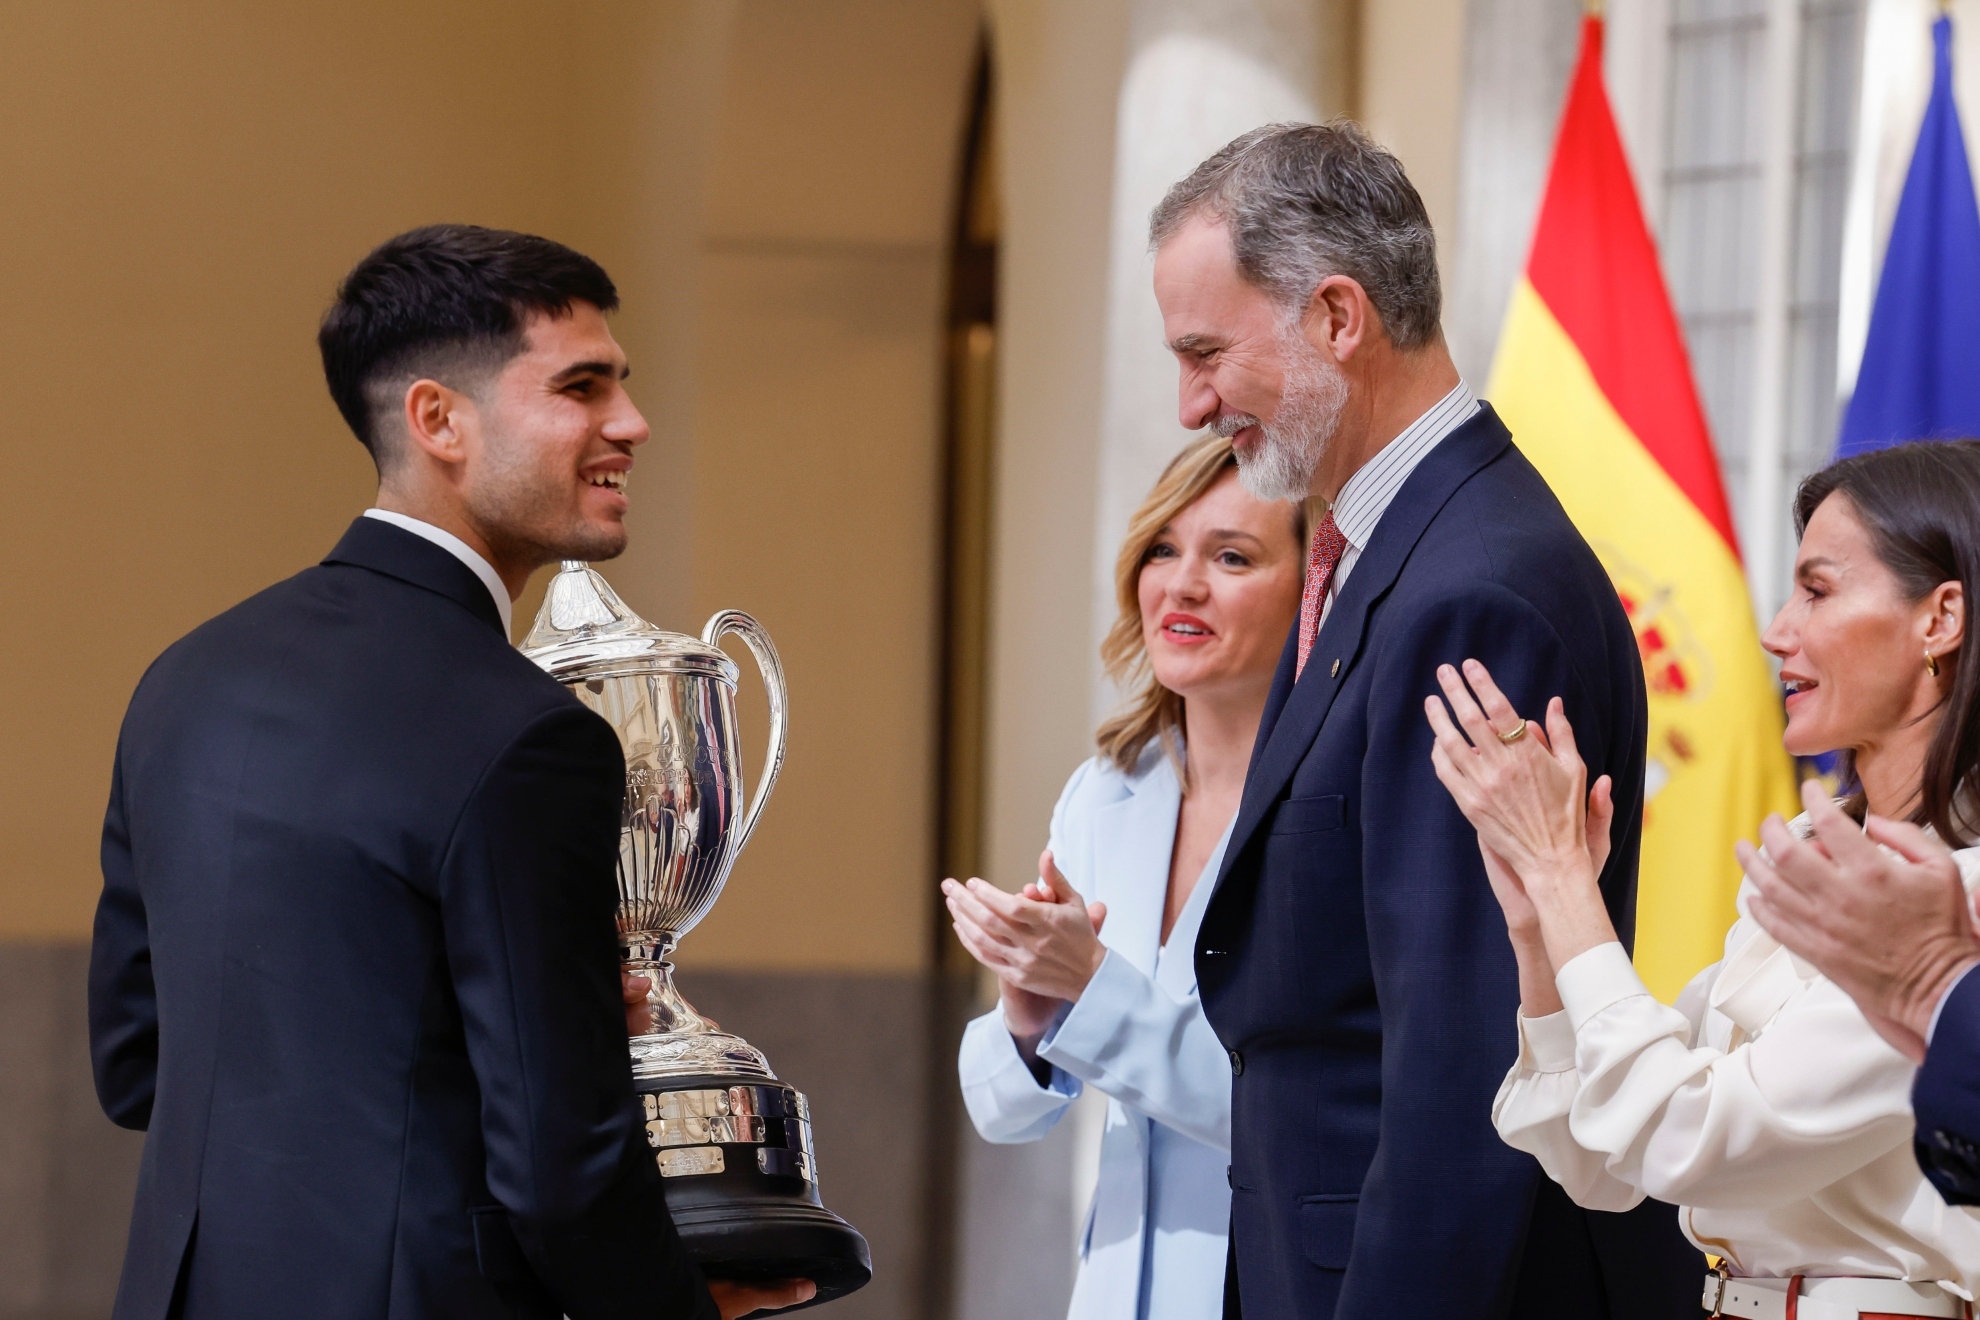 Carlos Alcaraz receiving the National Sports Award from the hands of King Felipe VI